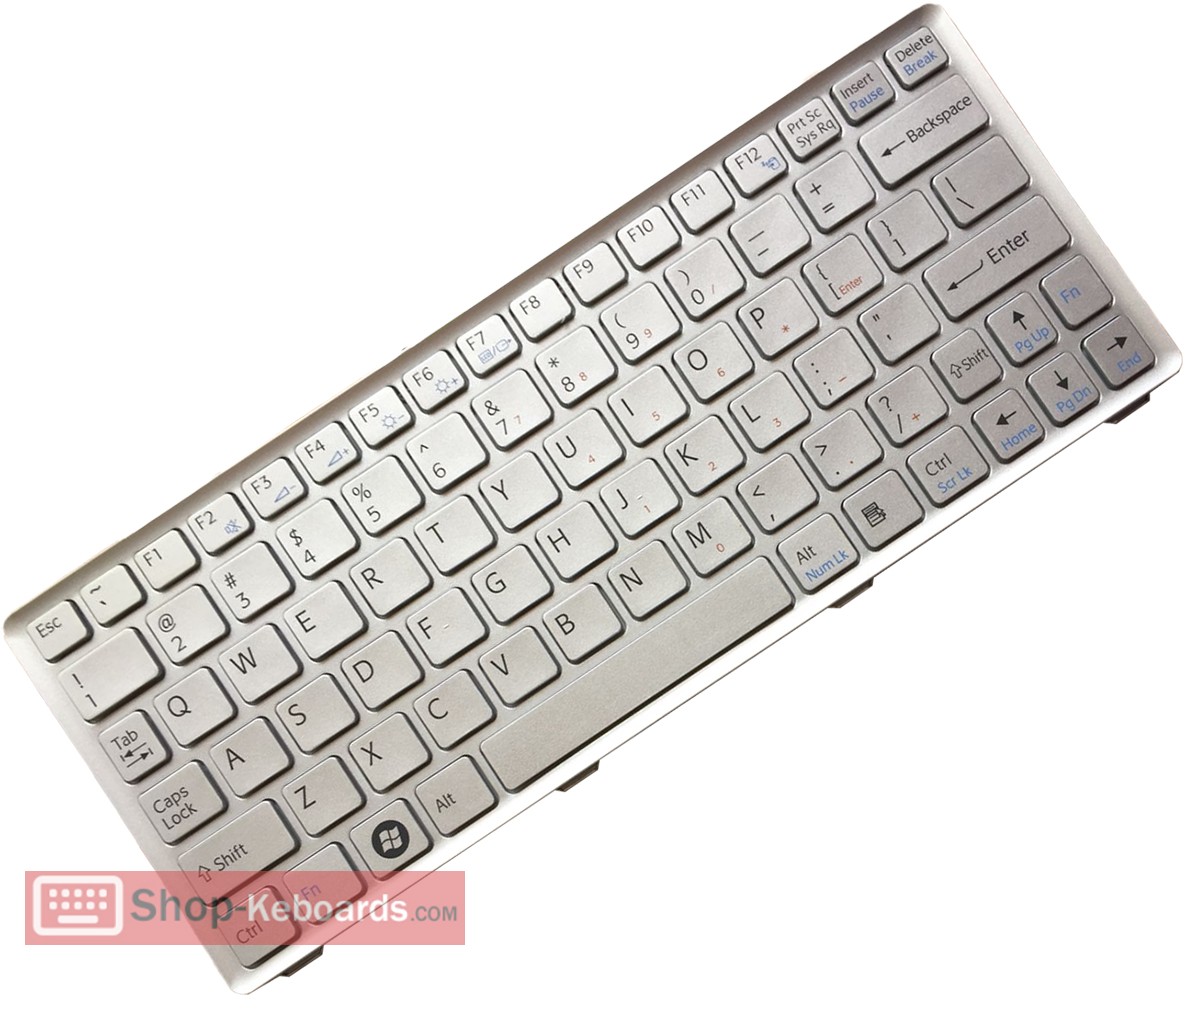 Sony Vaio VPC-W217 Keyboard replacement